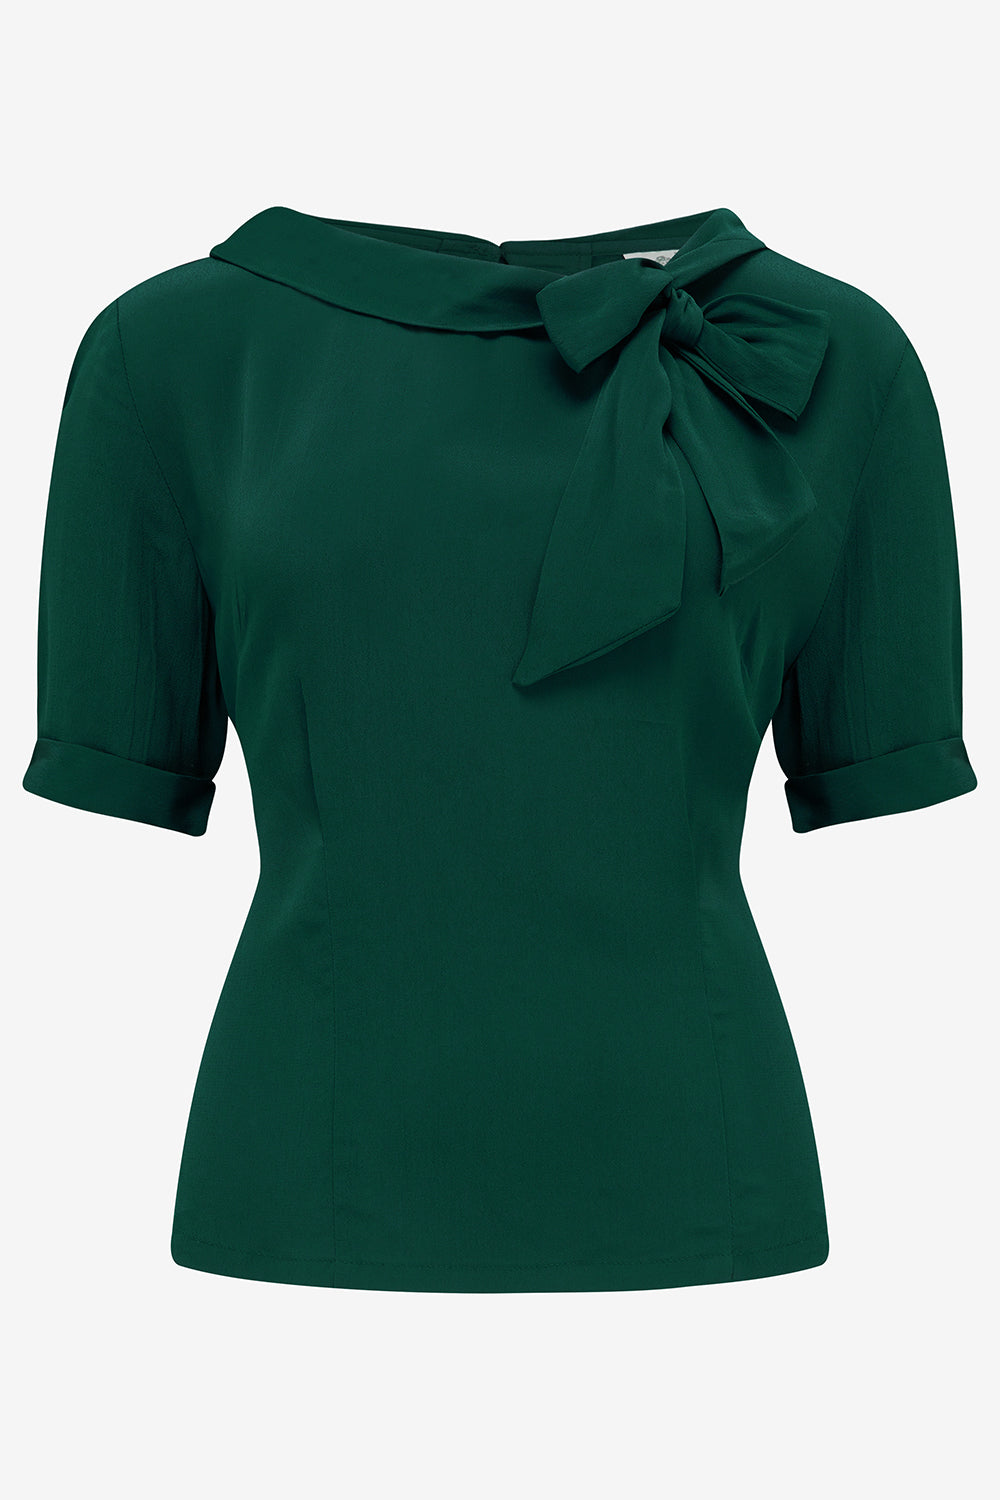 Cindy Blouse In Green , Classic 1940s Vintage Inspired Style - CC41, Goodwood Revival, Twinwood Festival, Viva Las Vegas Rockabilly Weekend Rock n Romance The Seamstress Of Bloomsbury